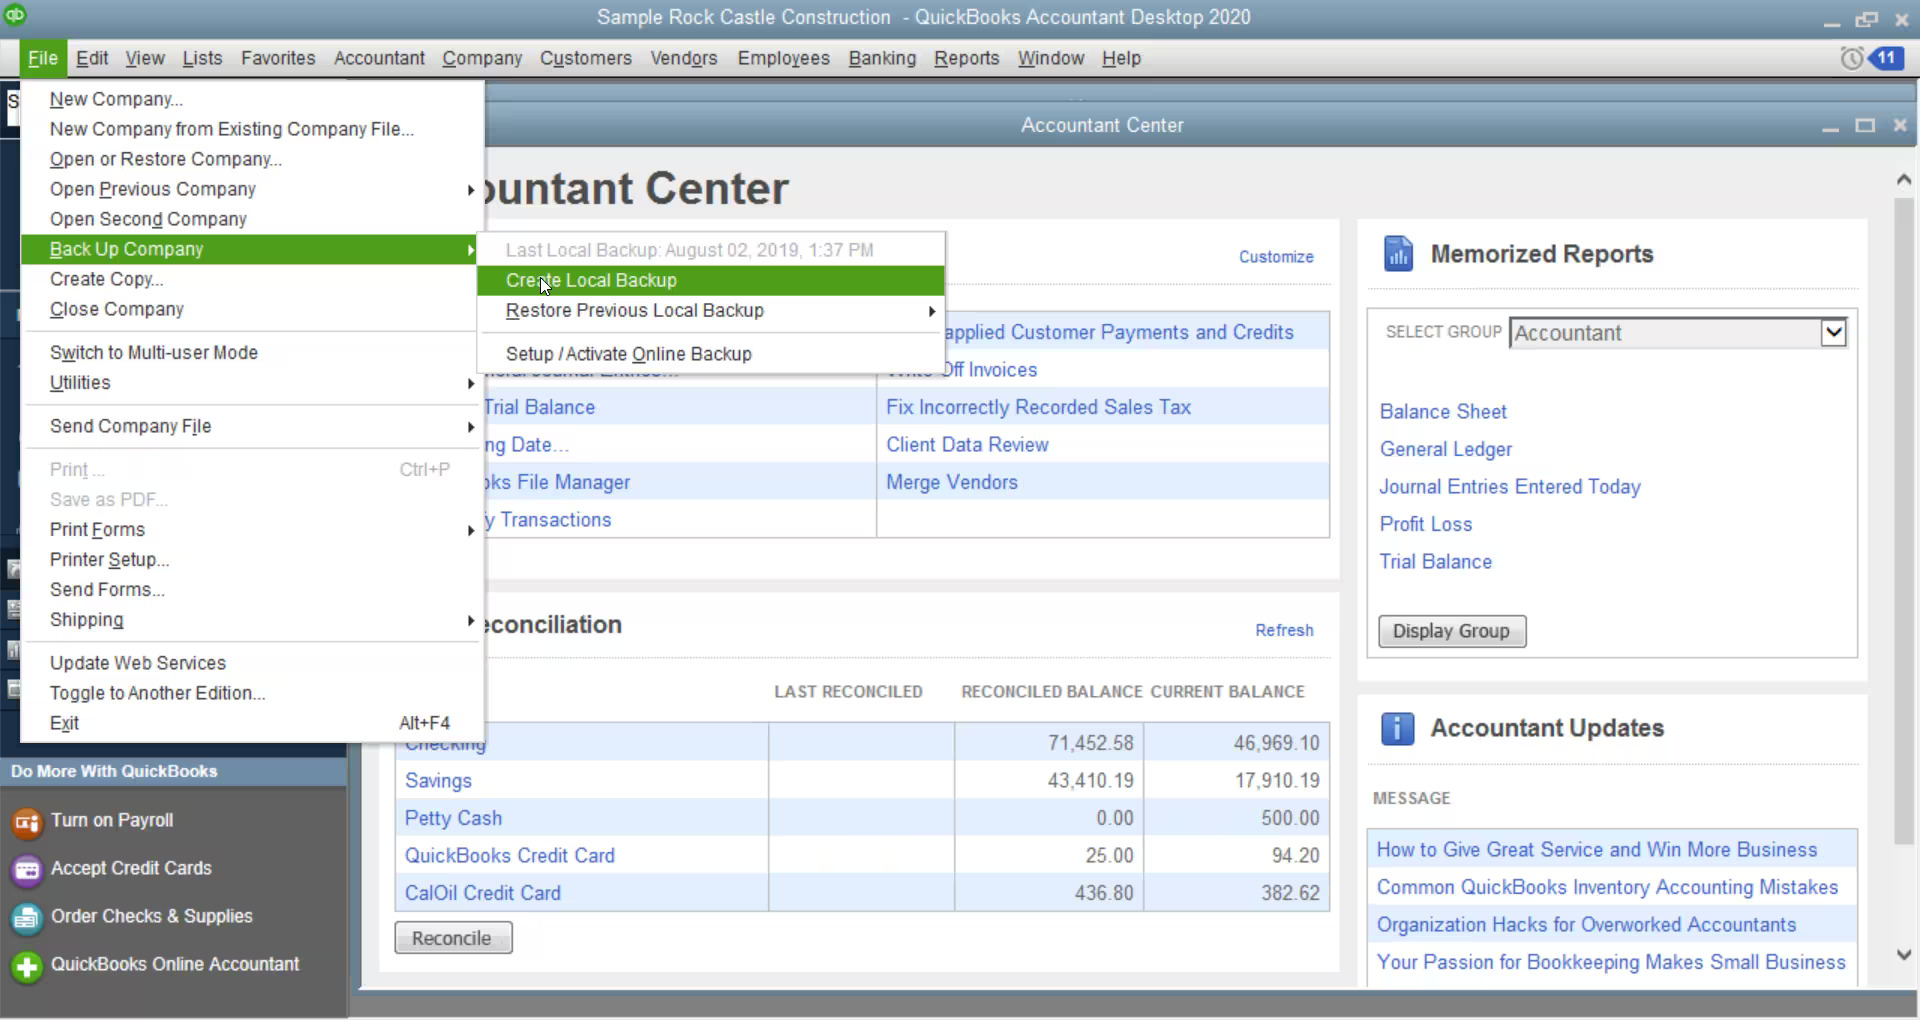 Information Transferred or Not While Using the QuickBooks Migration Tool
